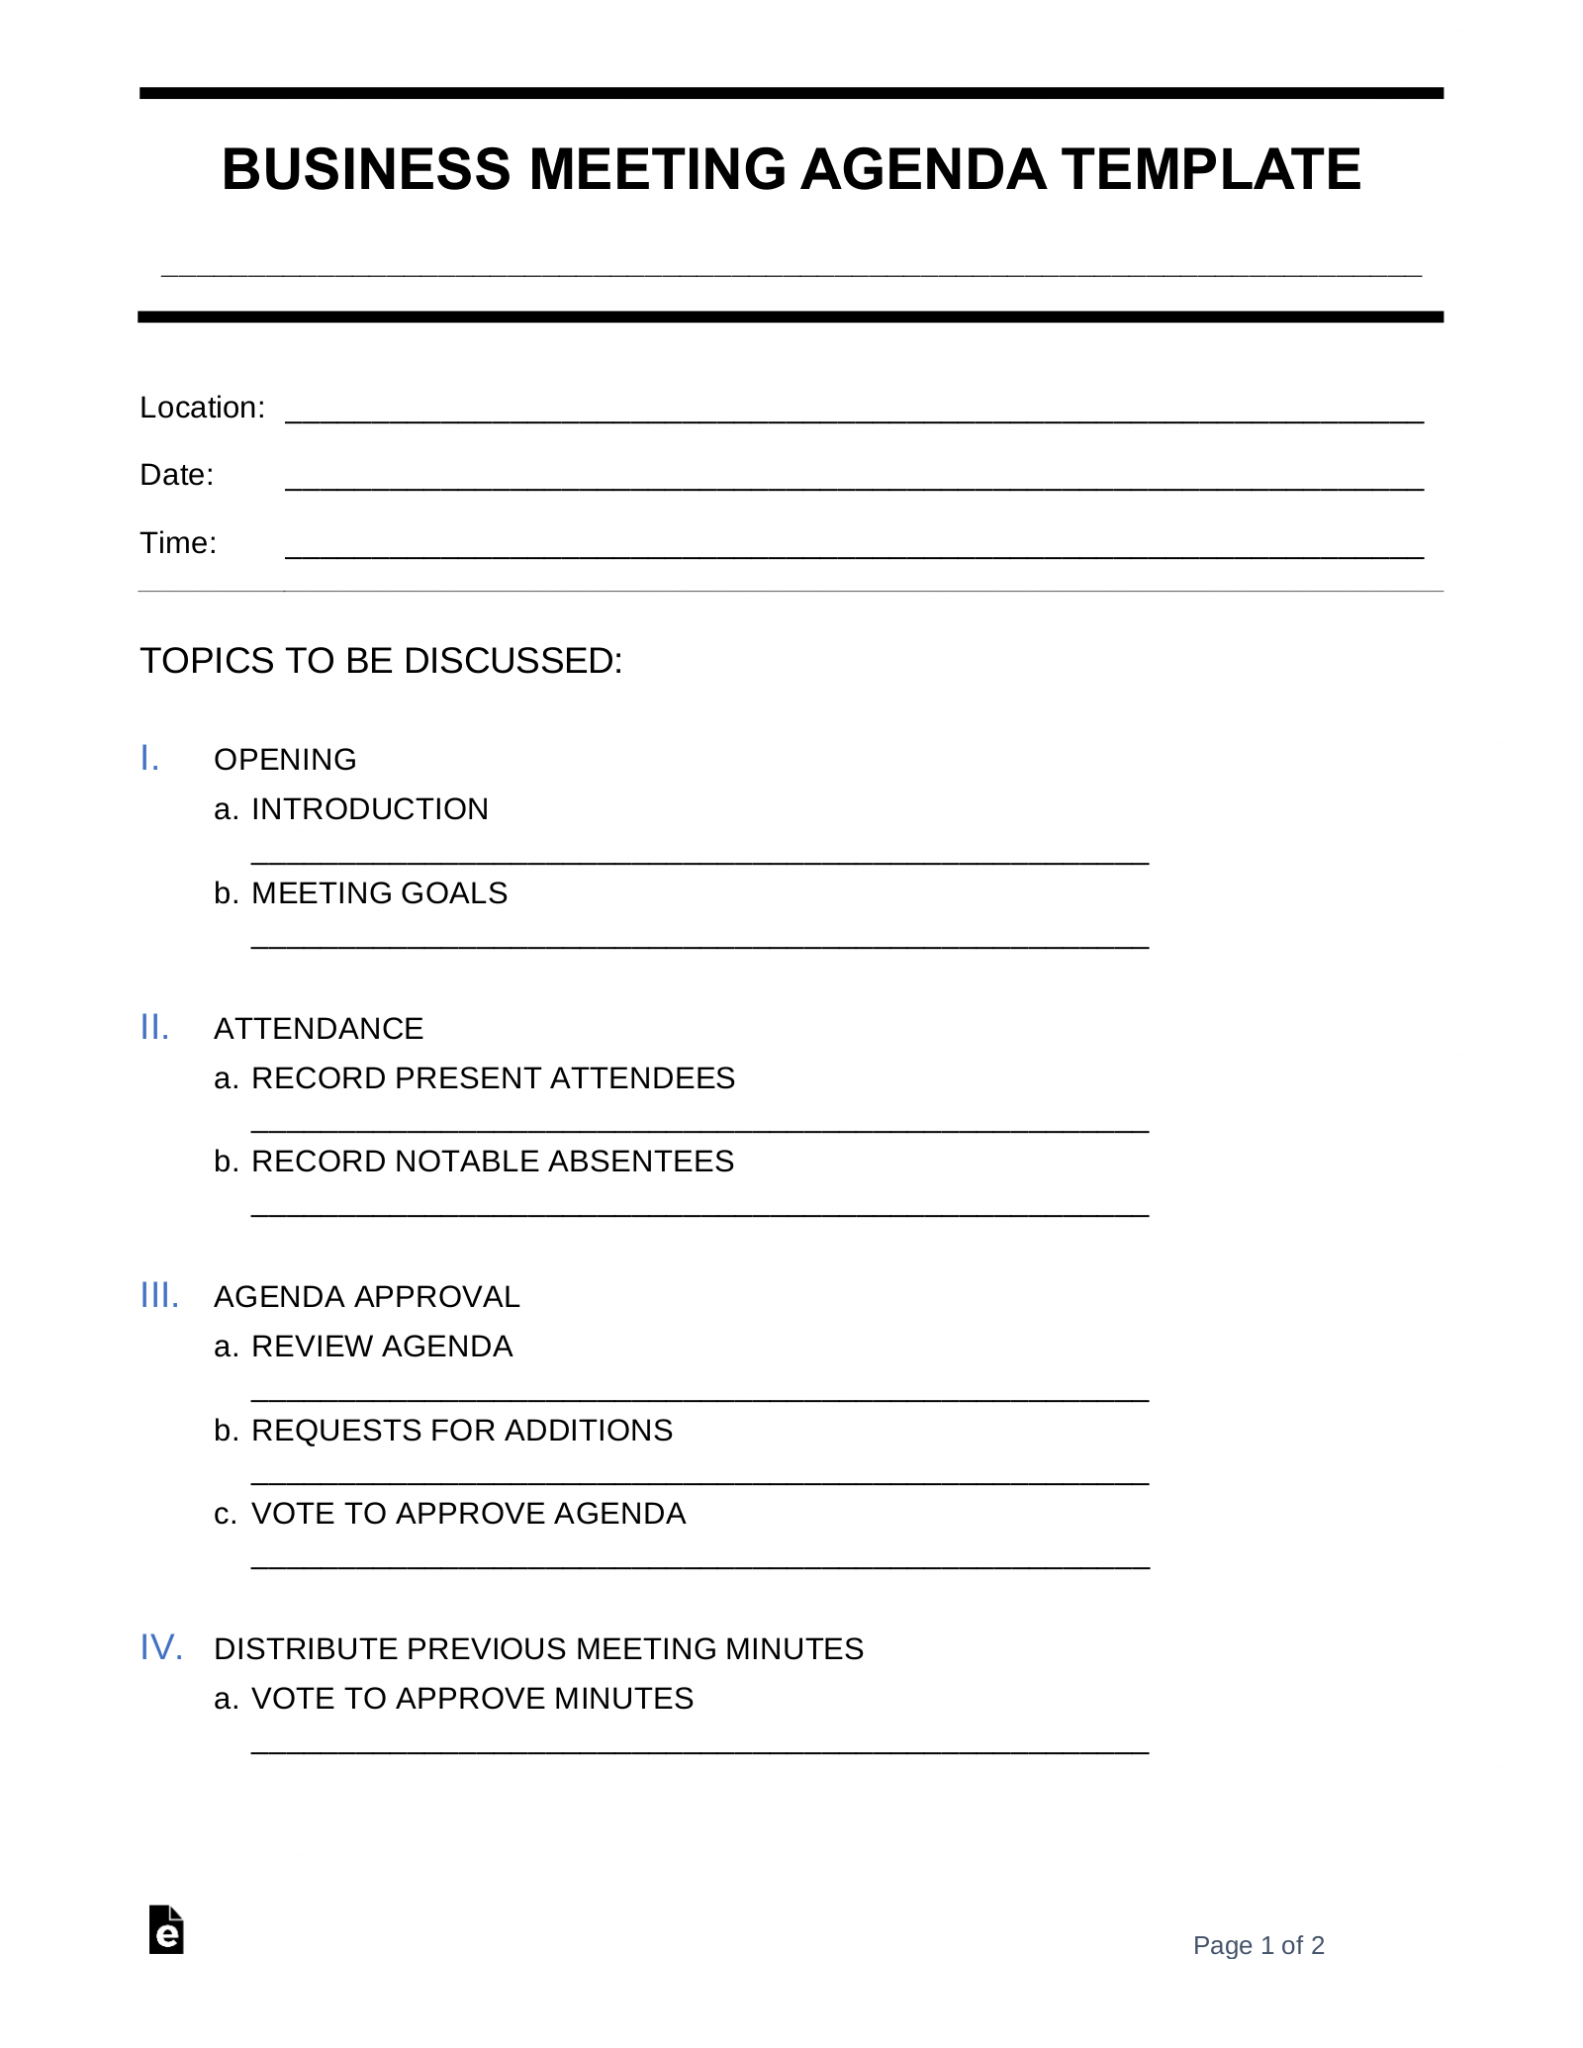 business-meeting-agenda-template-5-download-free-documents-in-pdf-word